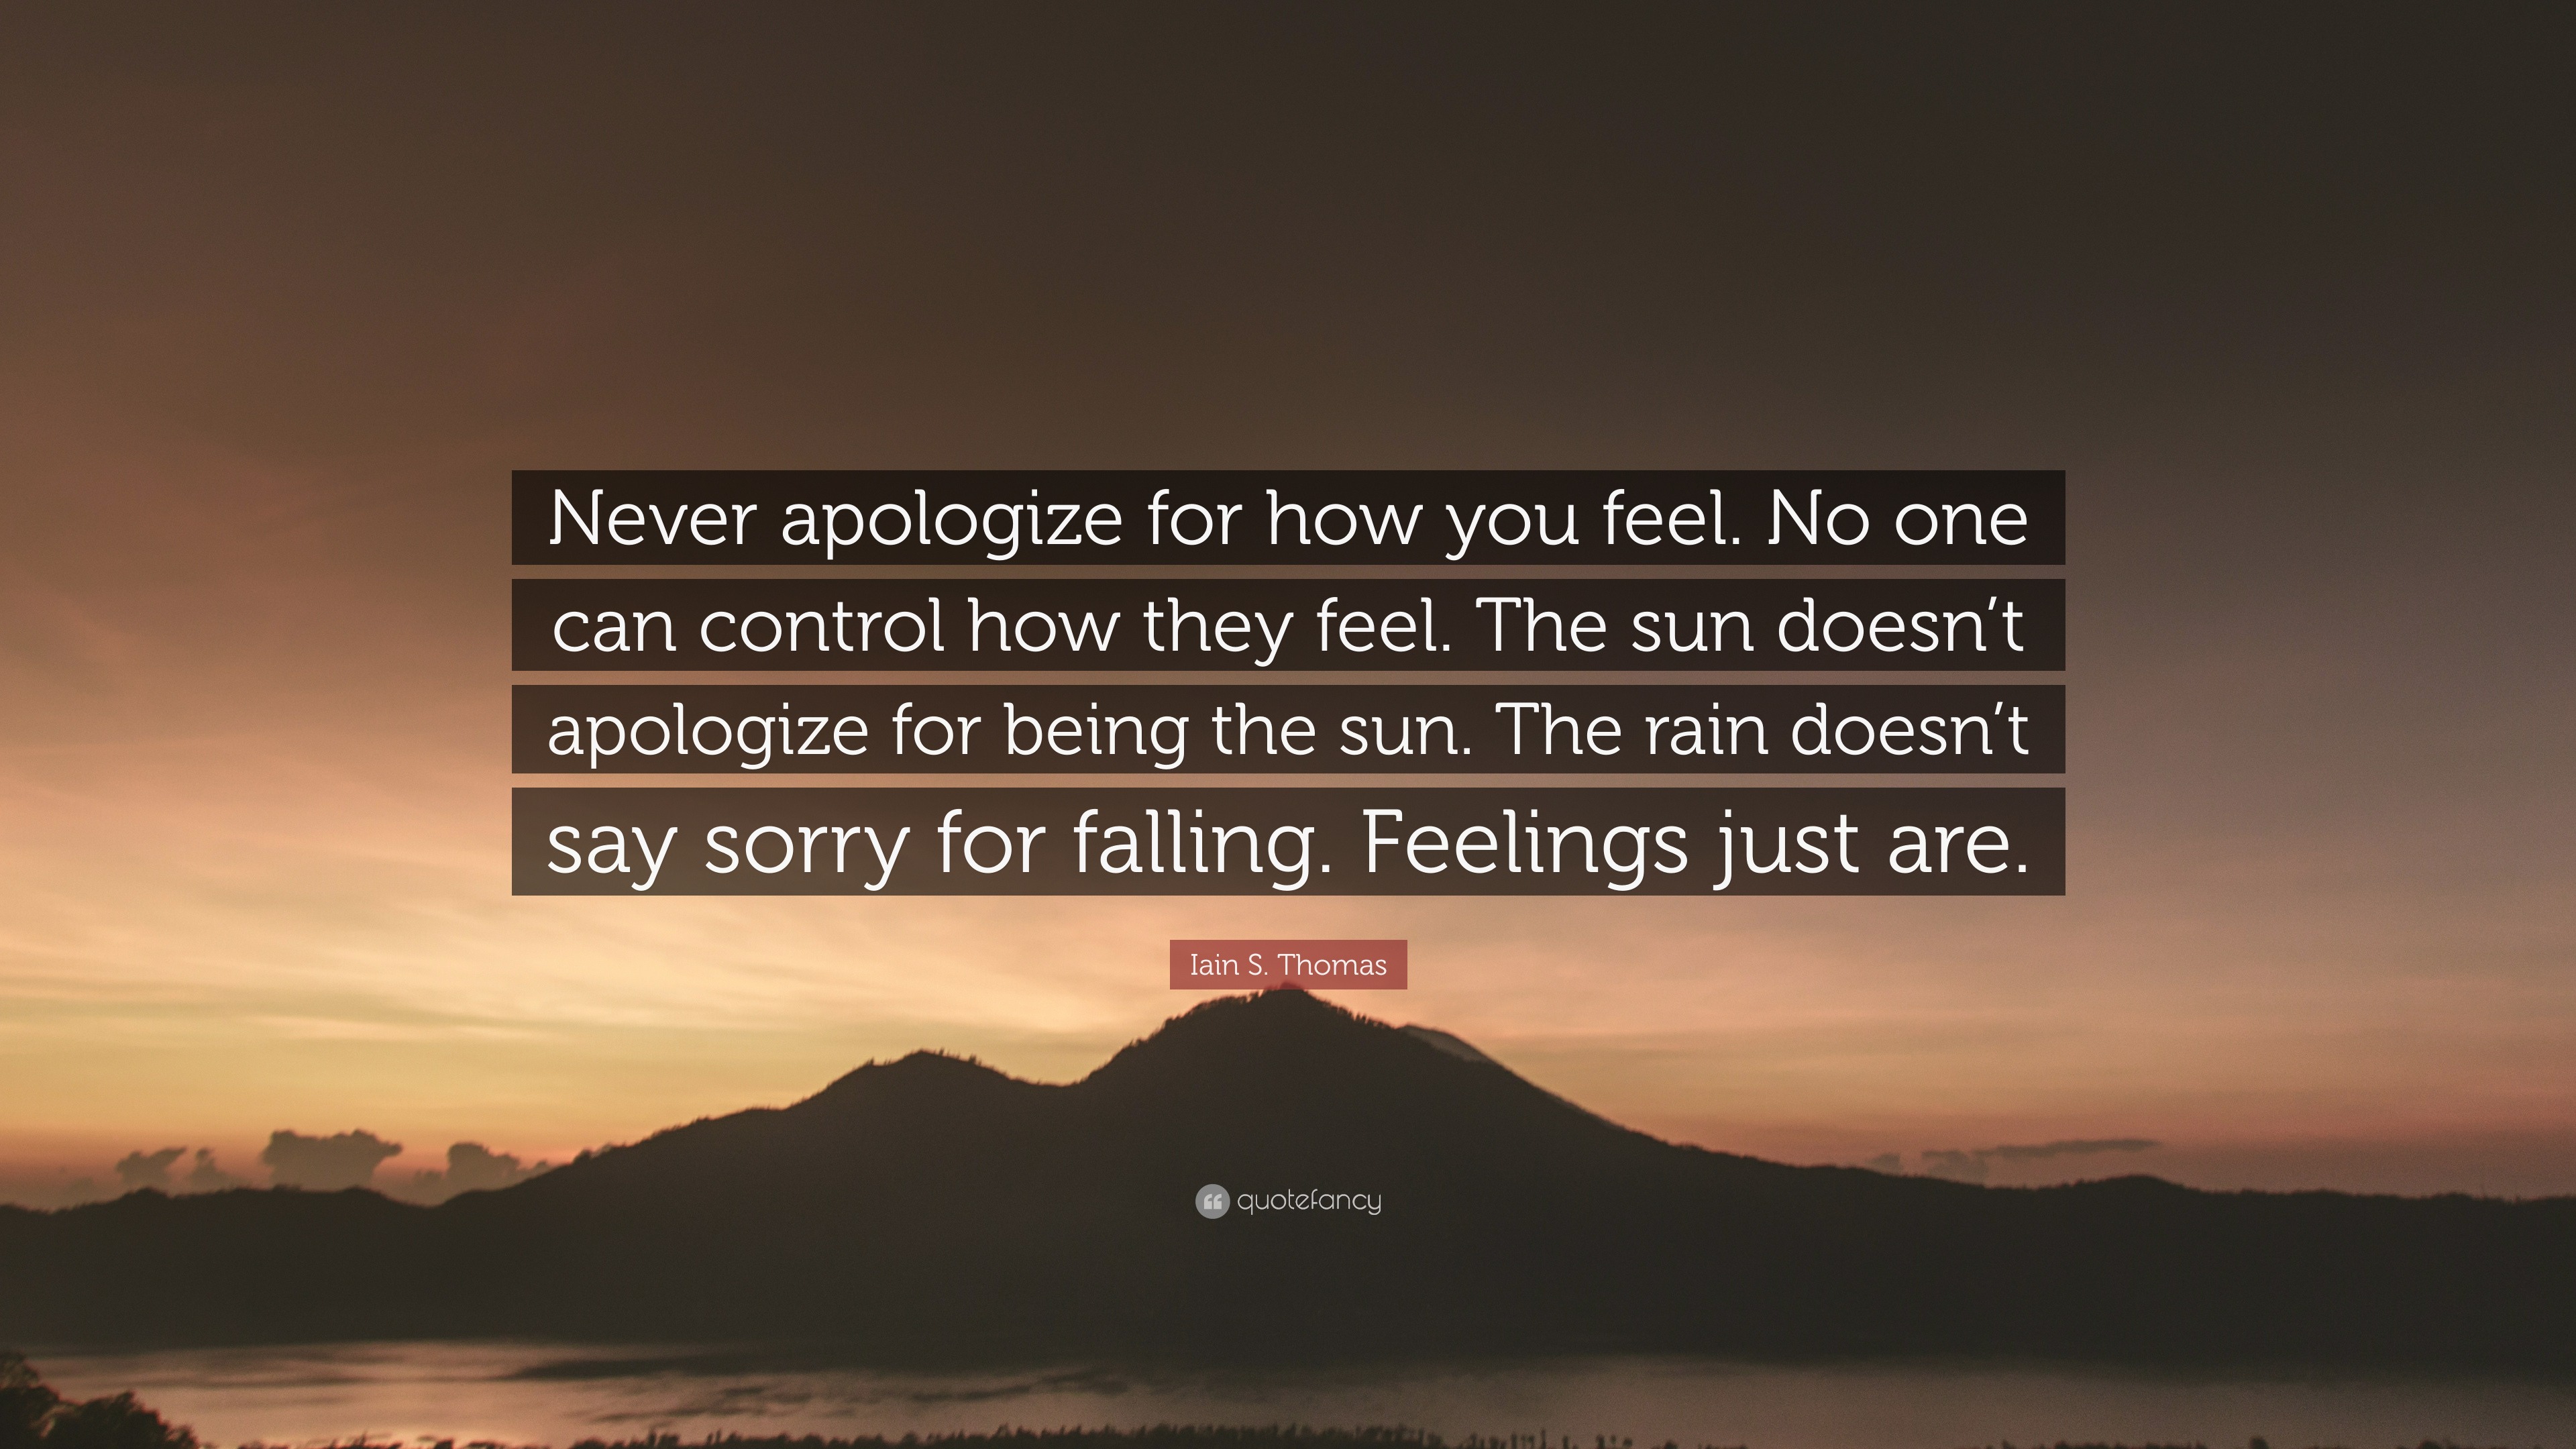 Iain S. Thomas Quote: "Never apologize for how you feel. No one can ...